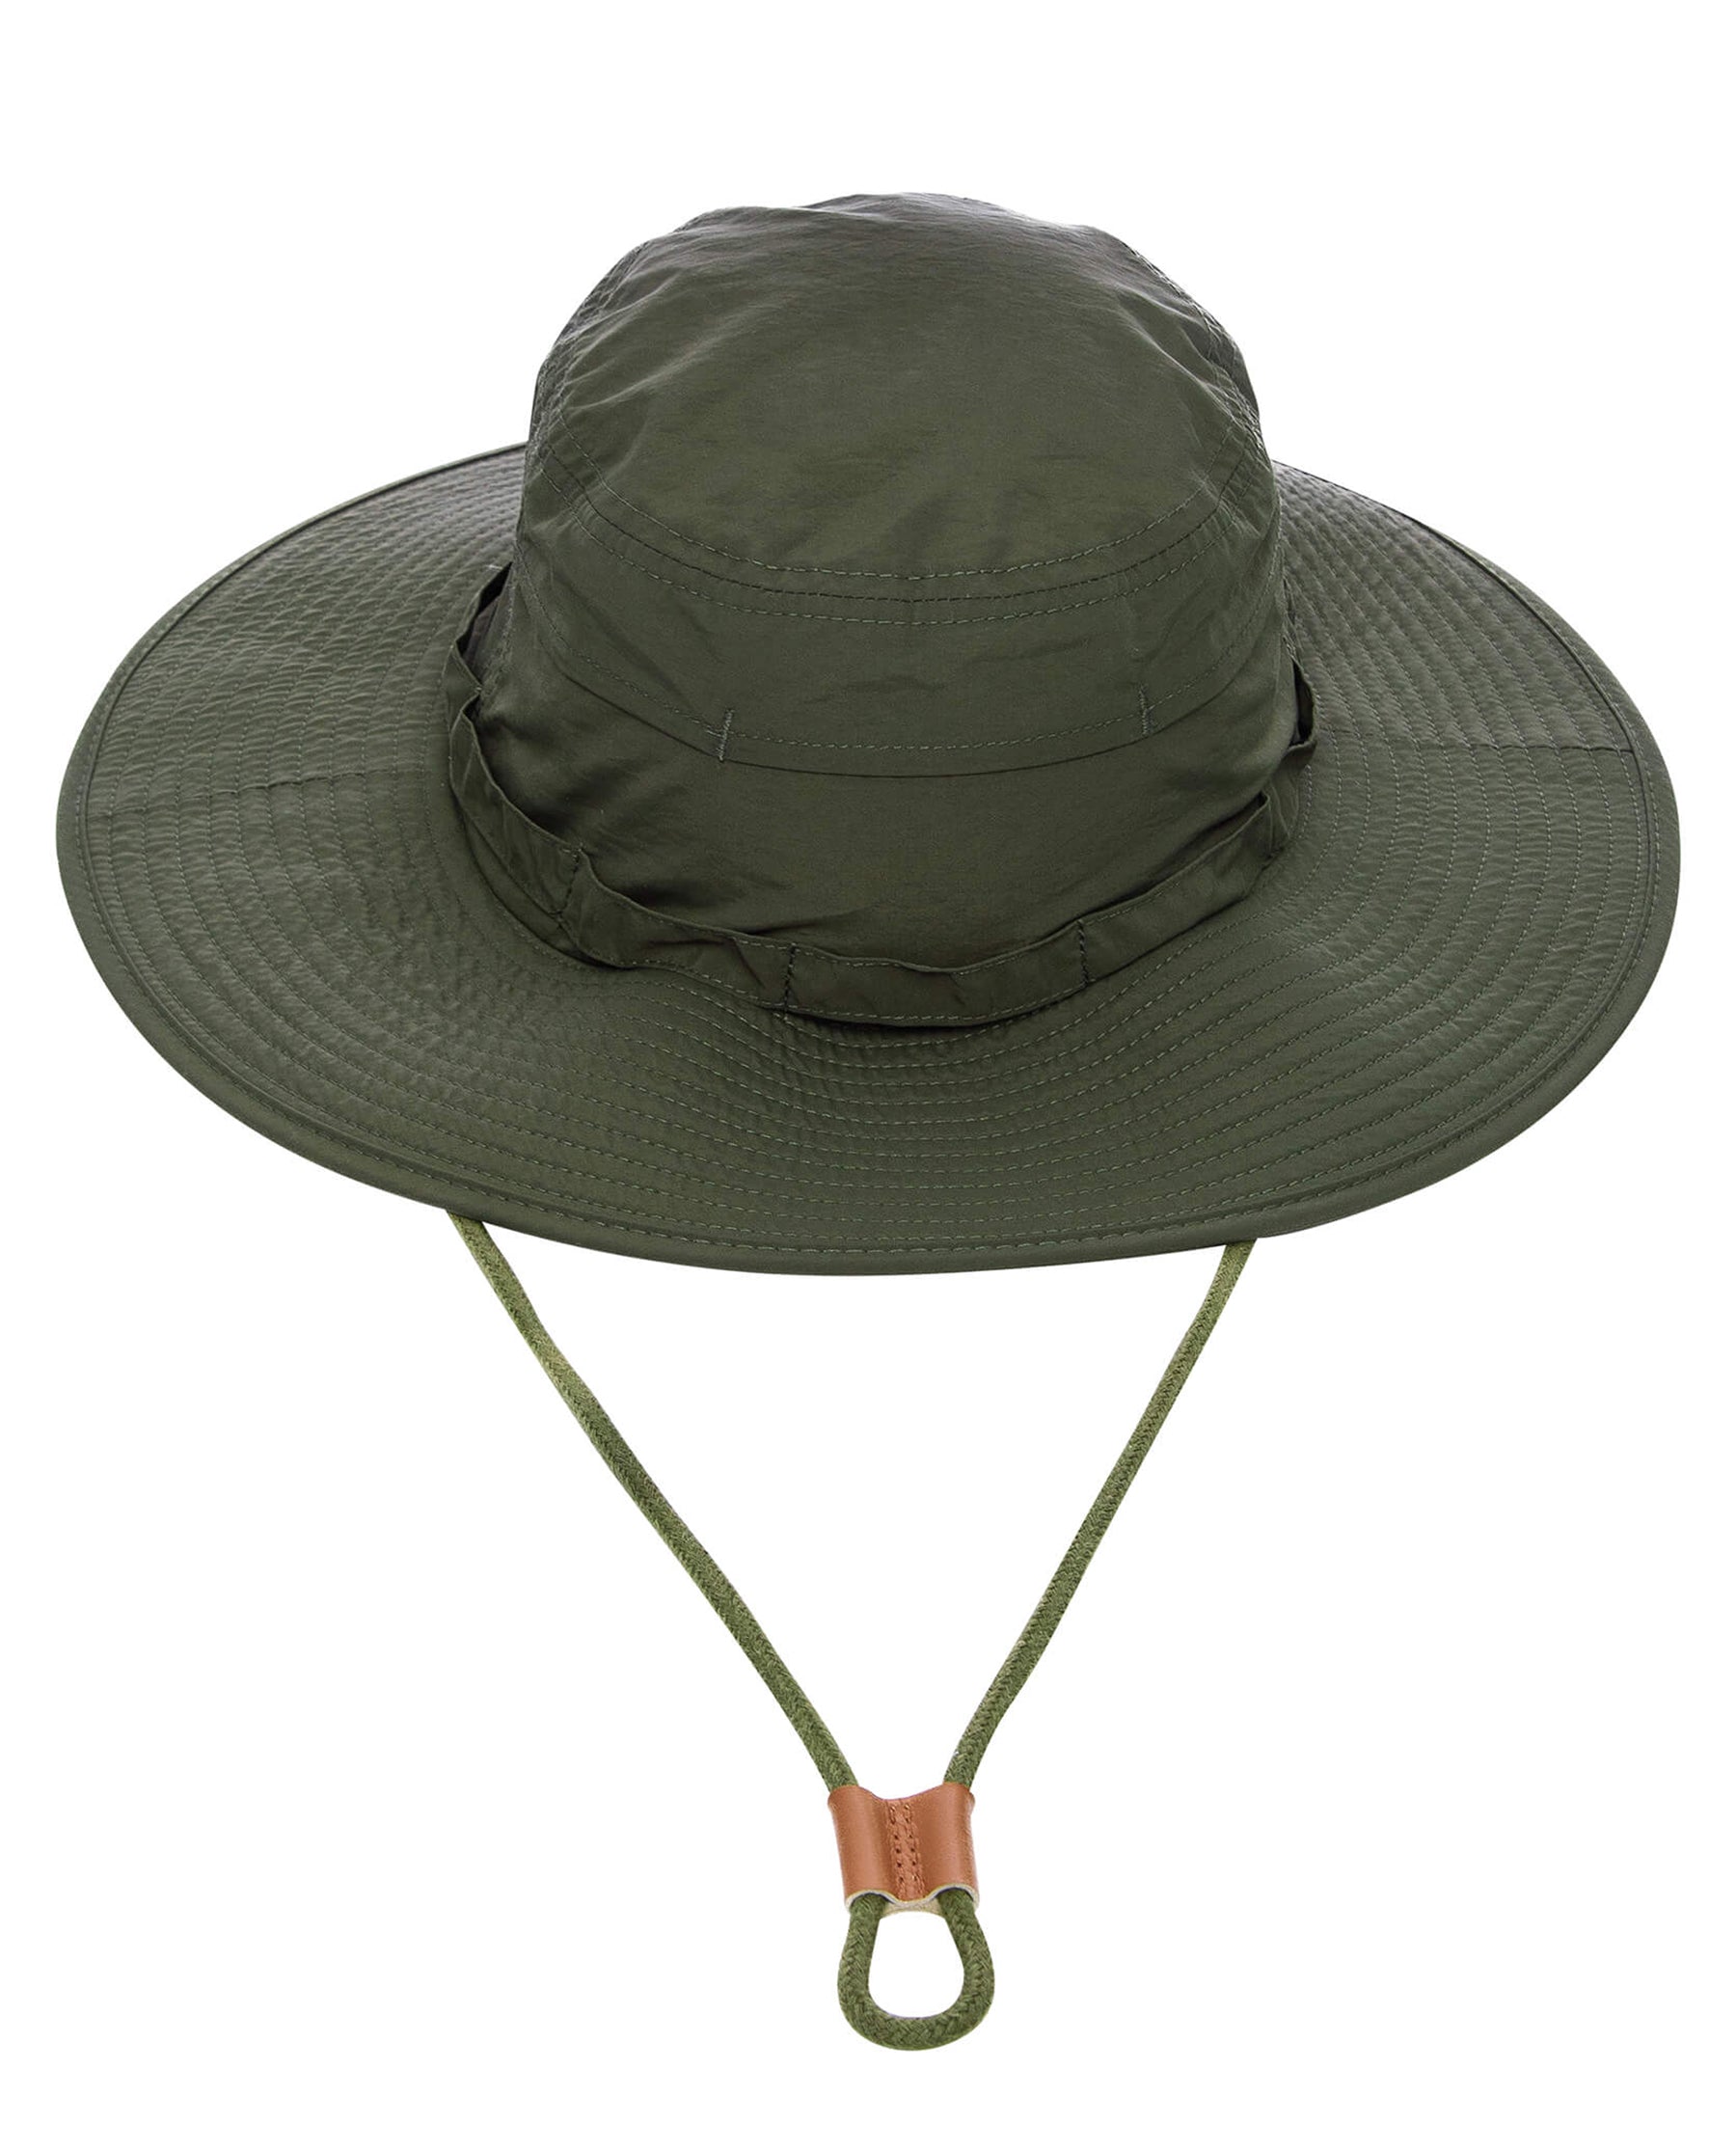 The Incline Hat. -- Army and Poppy HATS THE GREAT. SP24 TGO